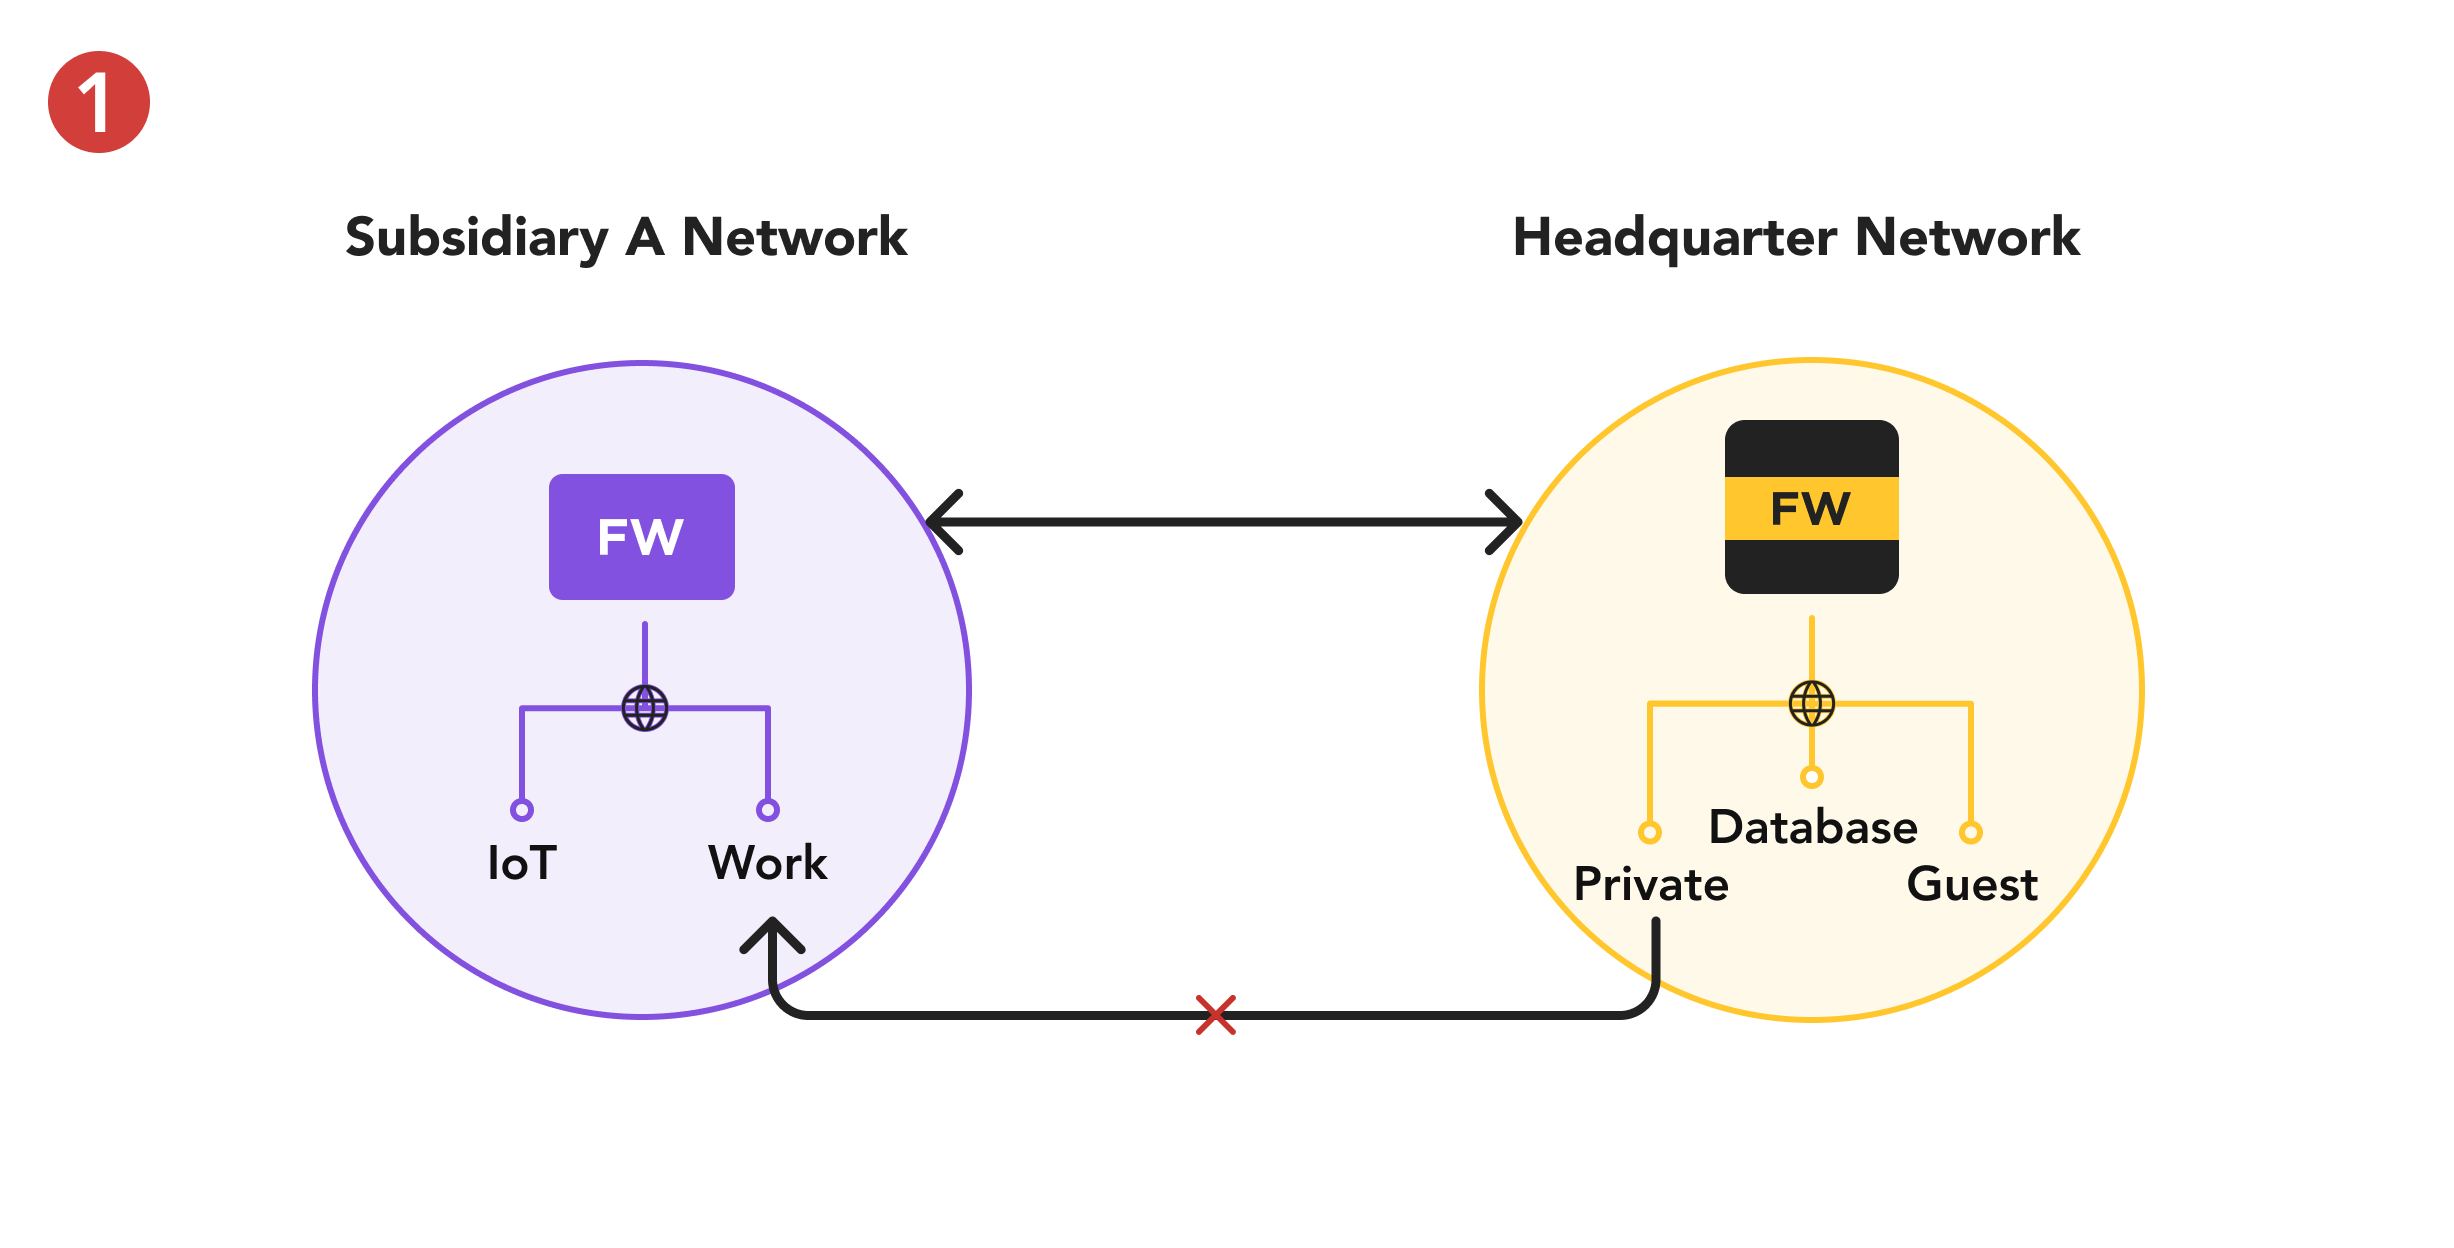 Site to Site VPN - Headquarter Network with Private being block to the Work connection to Subsidiary A.